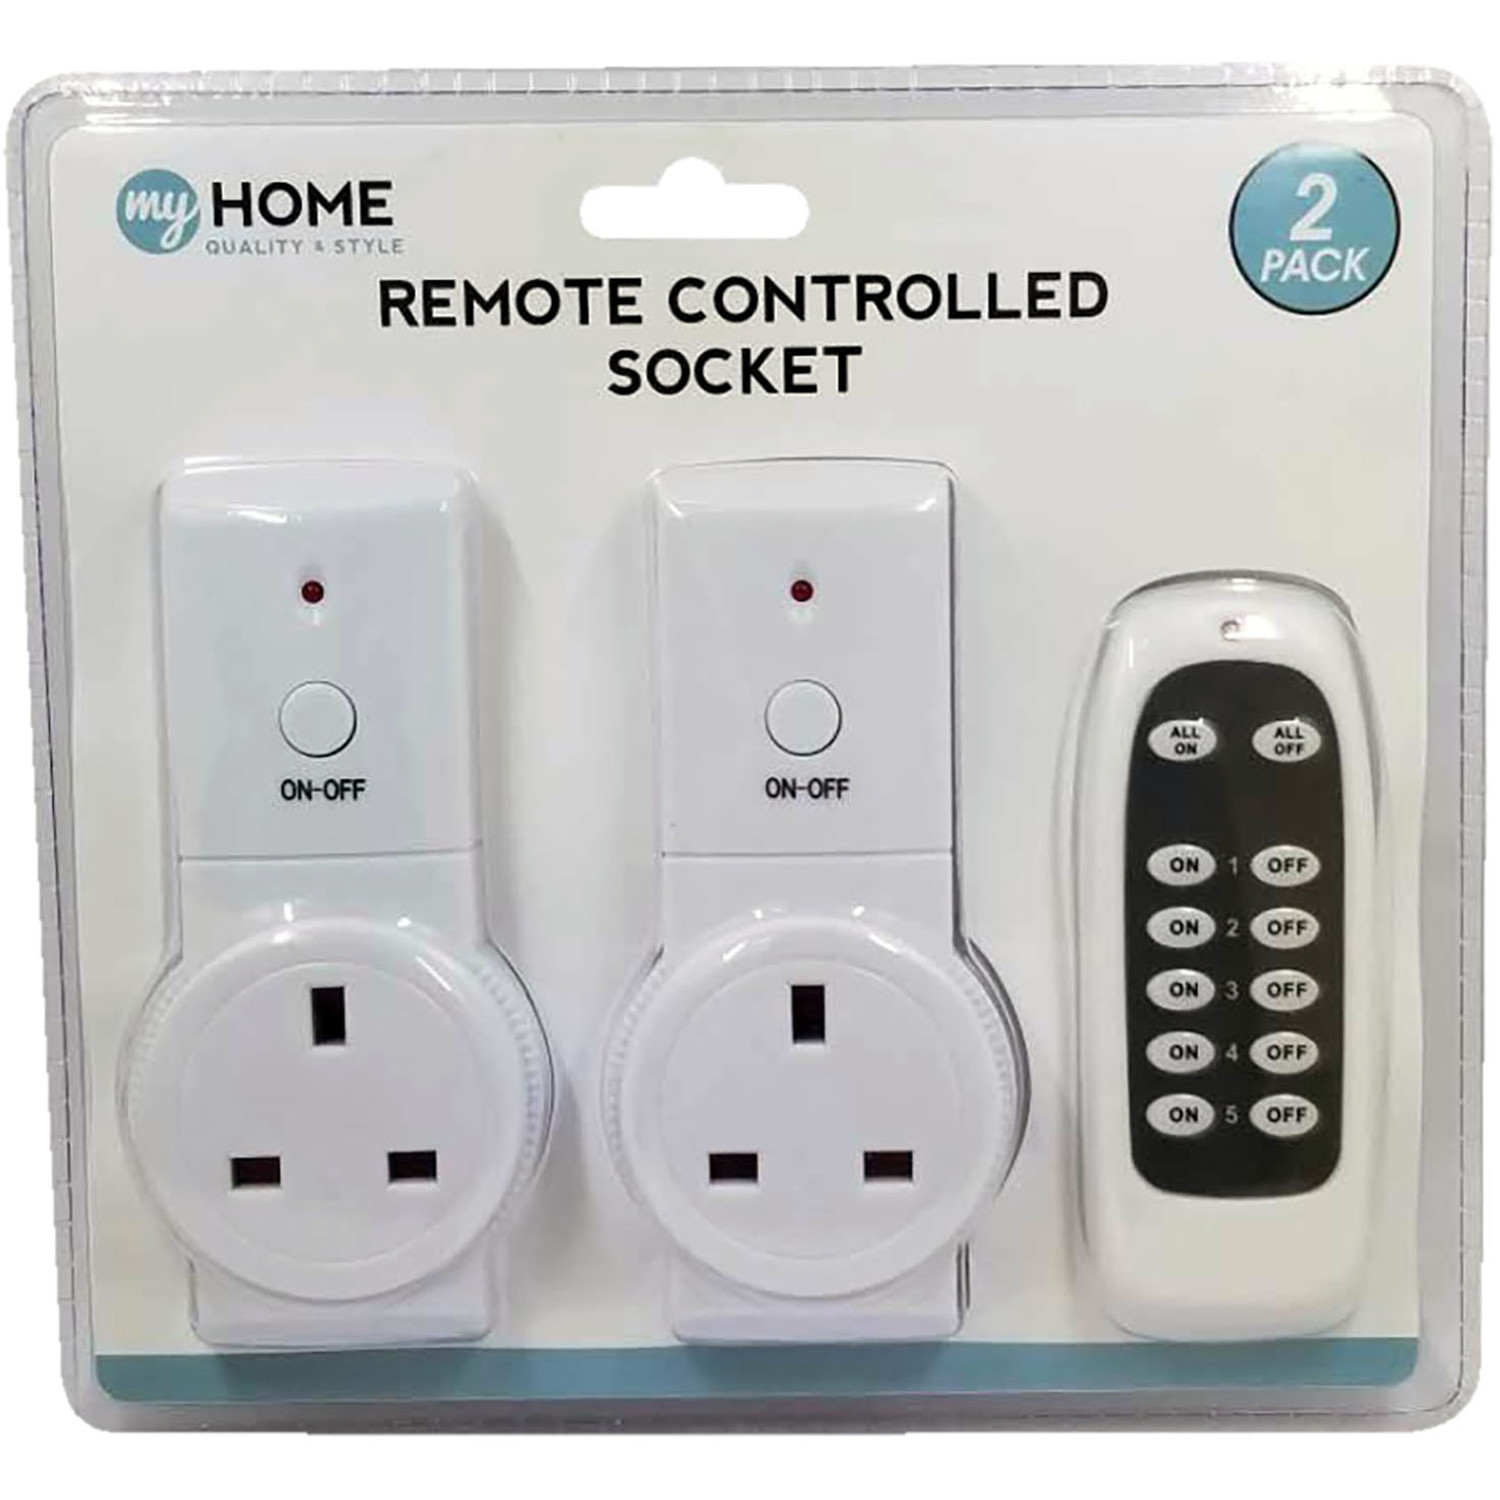 My Home Remote Controlled Socket 2 Pack Image